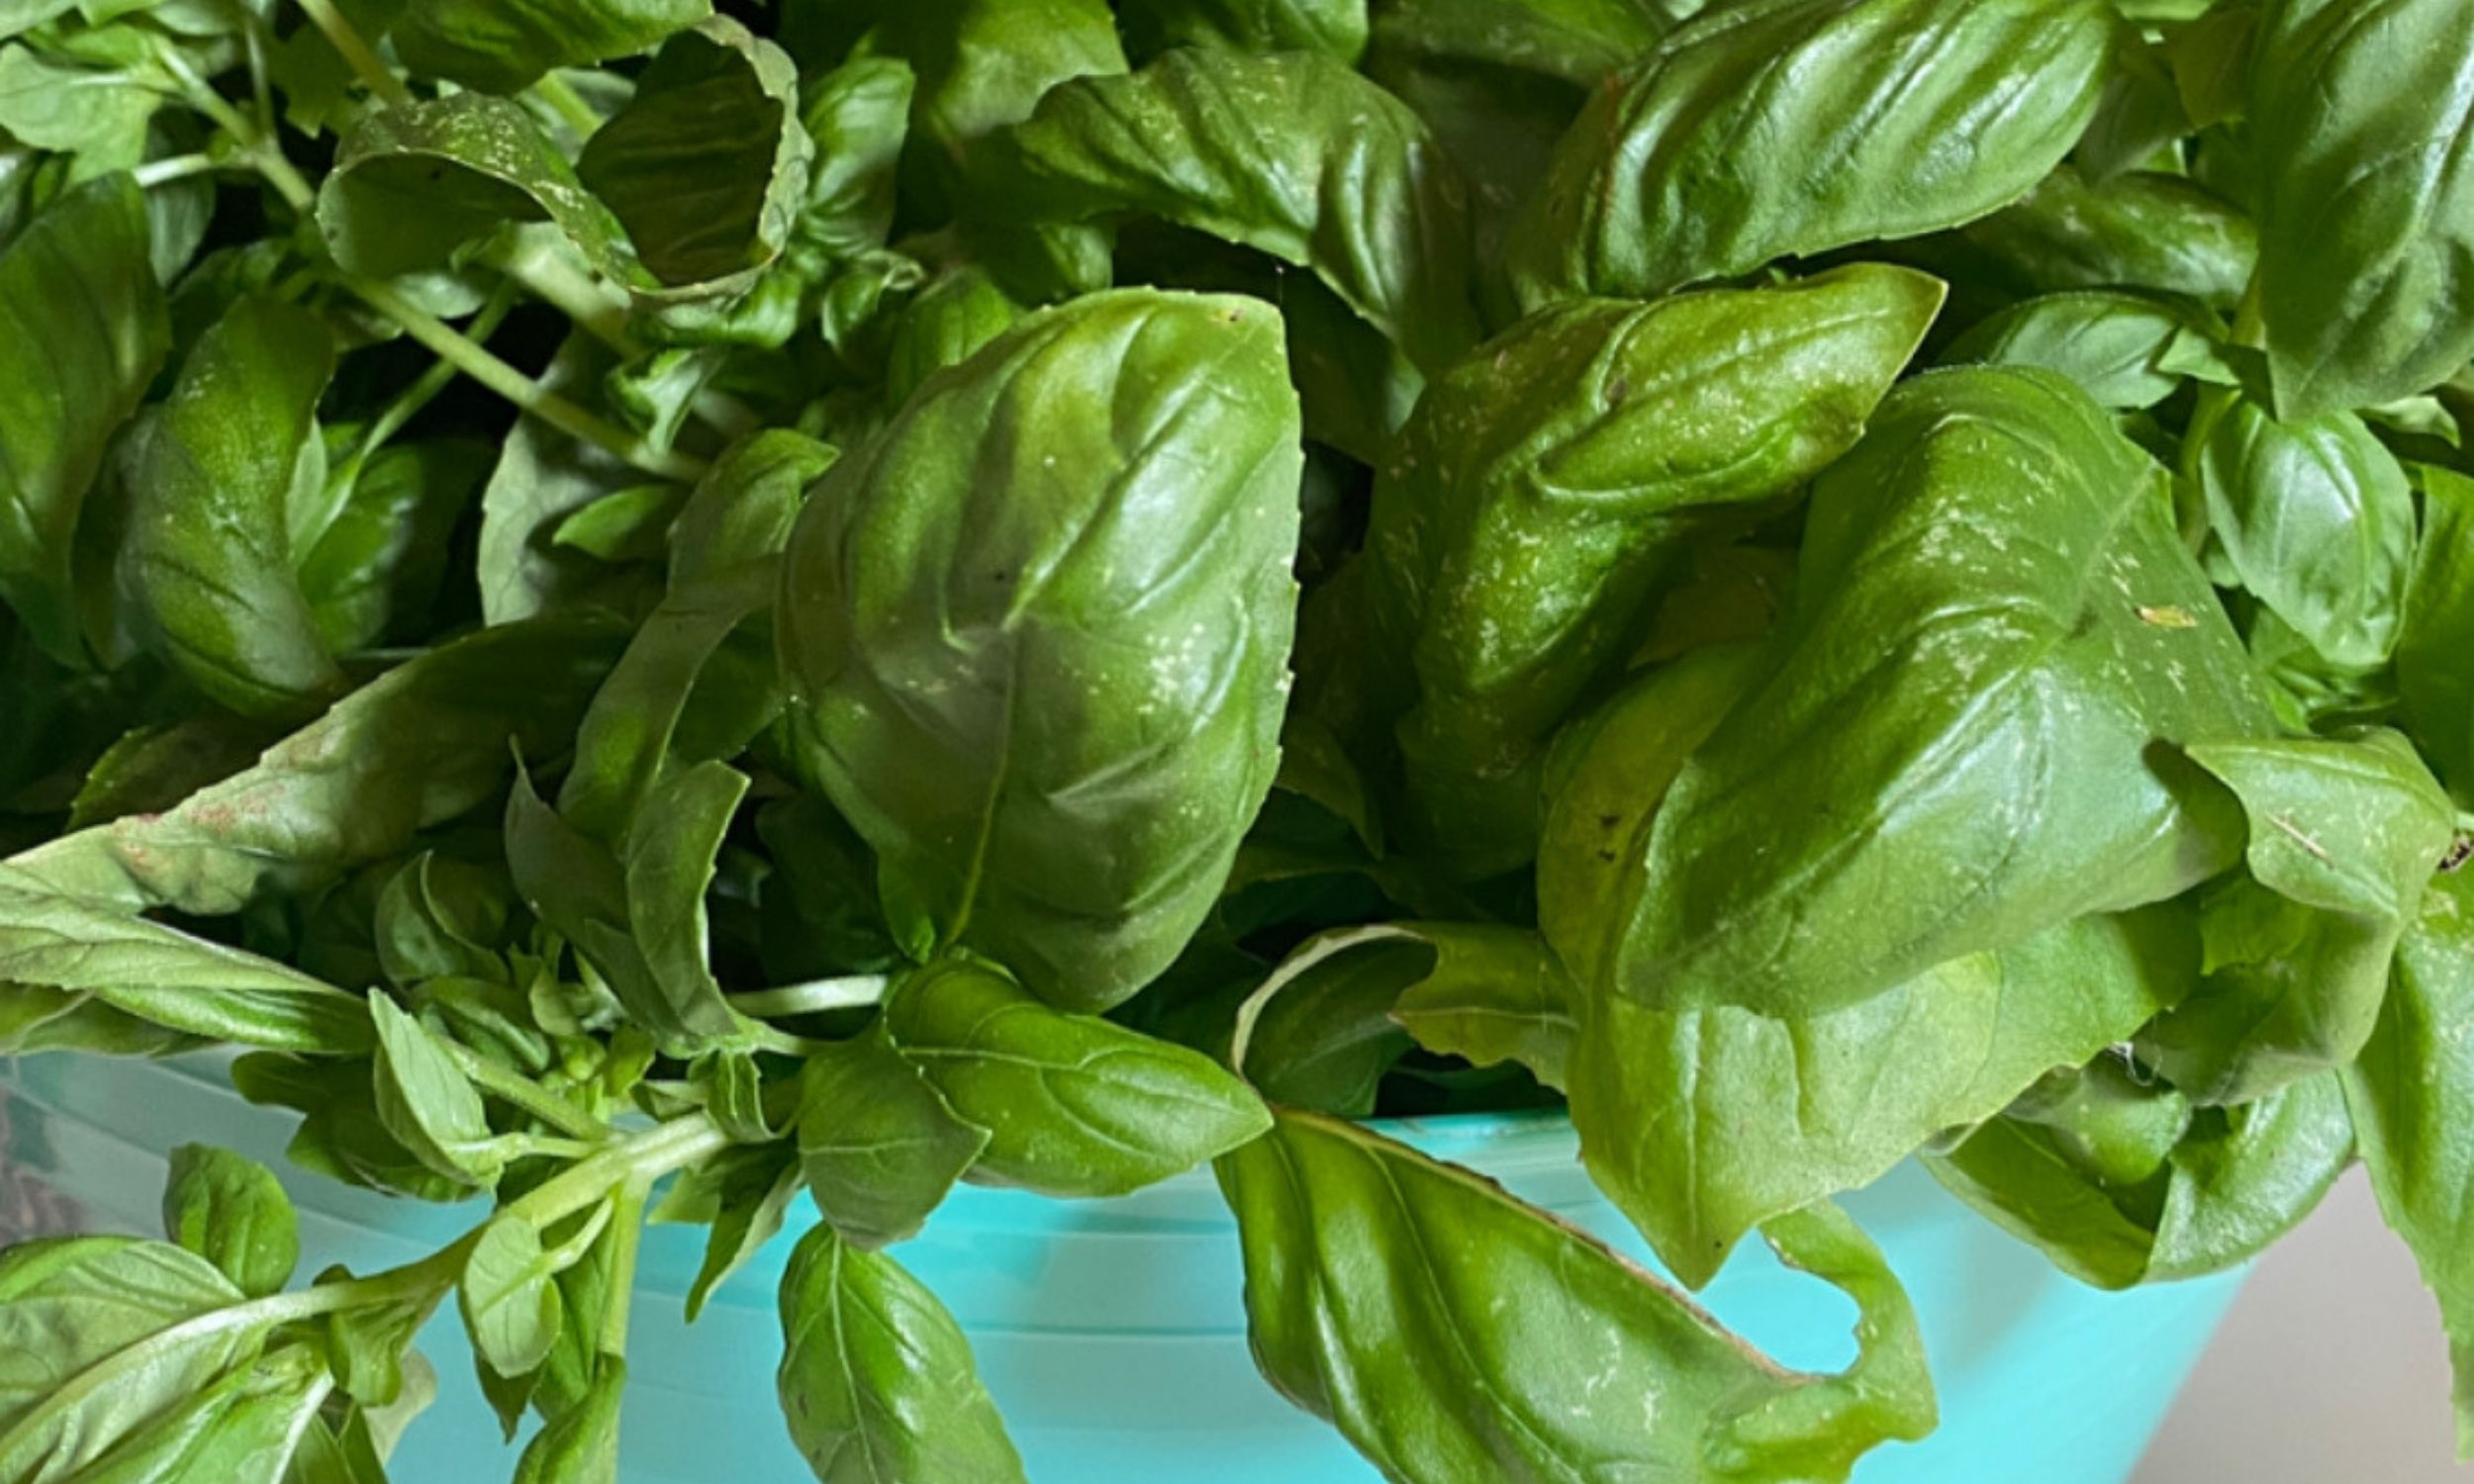 basil still on the stem in a teal bucket